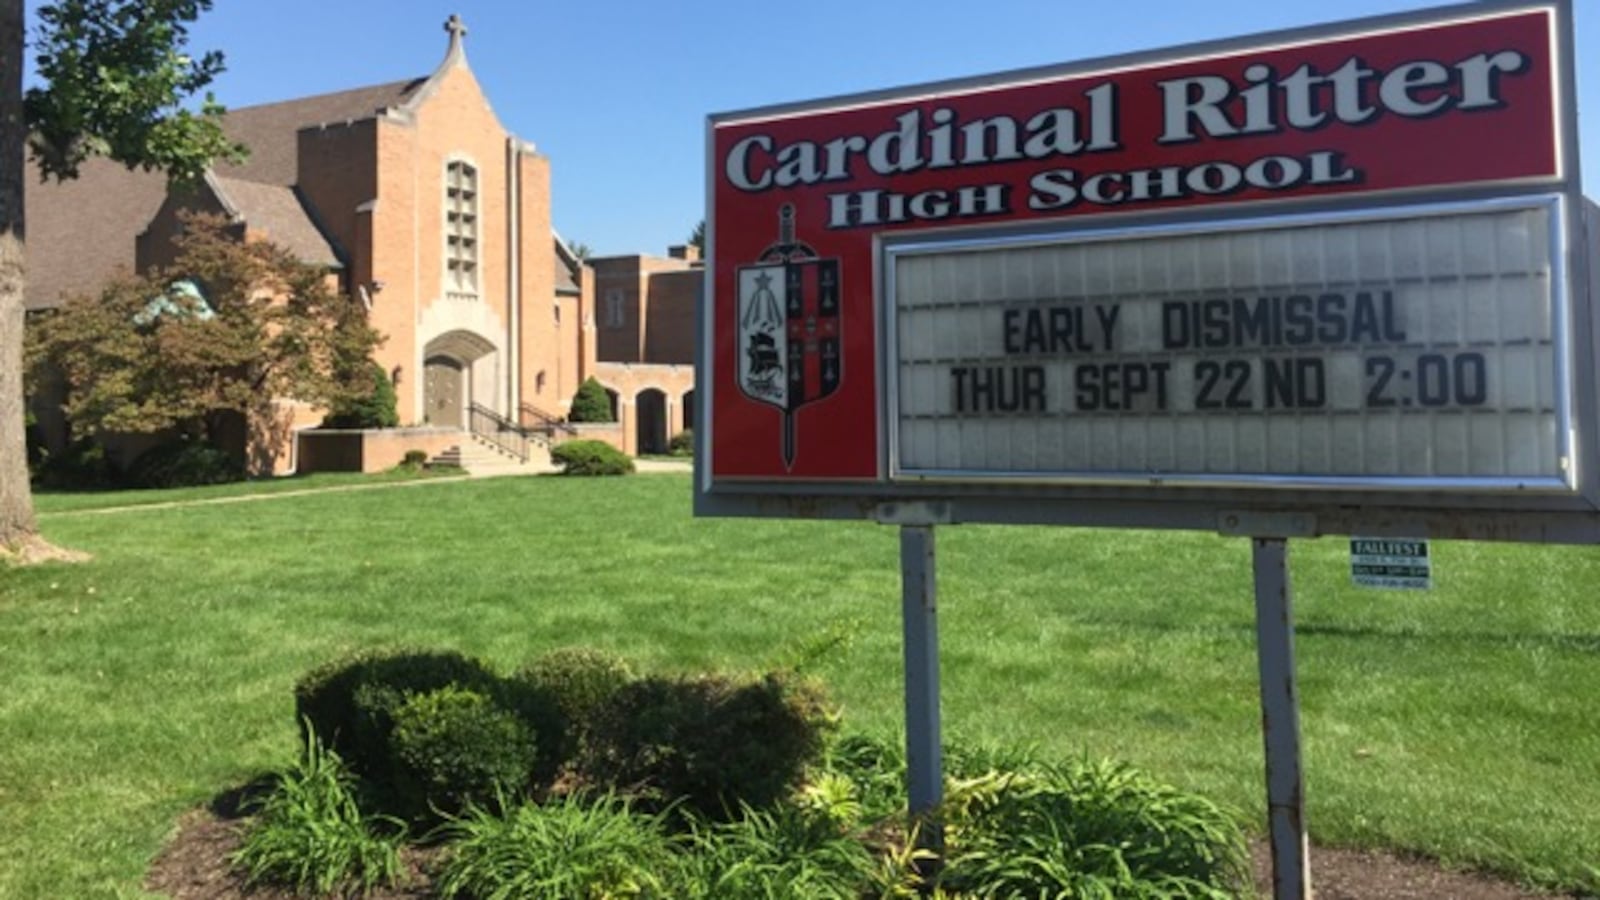 Cardinal Ritter High School has one of the highest percentages of students paying tuition with state-funded vouchers in Indiana.